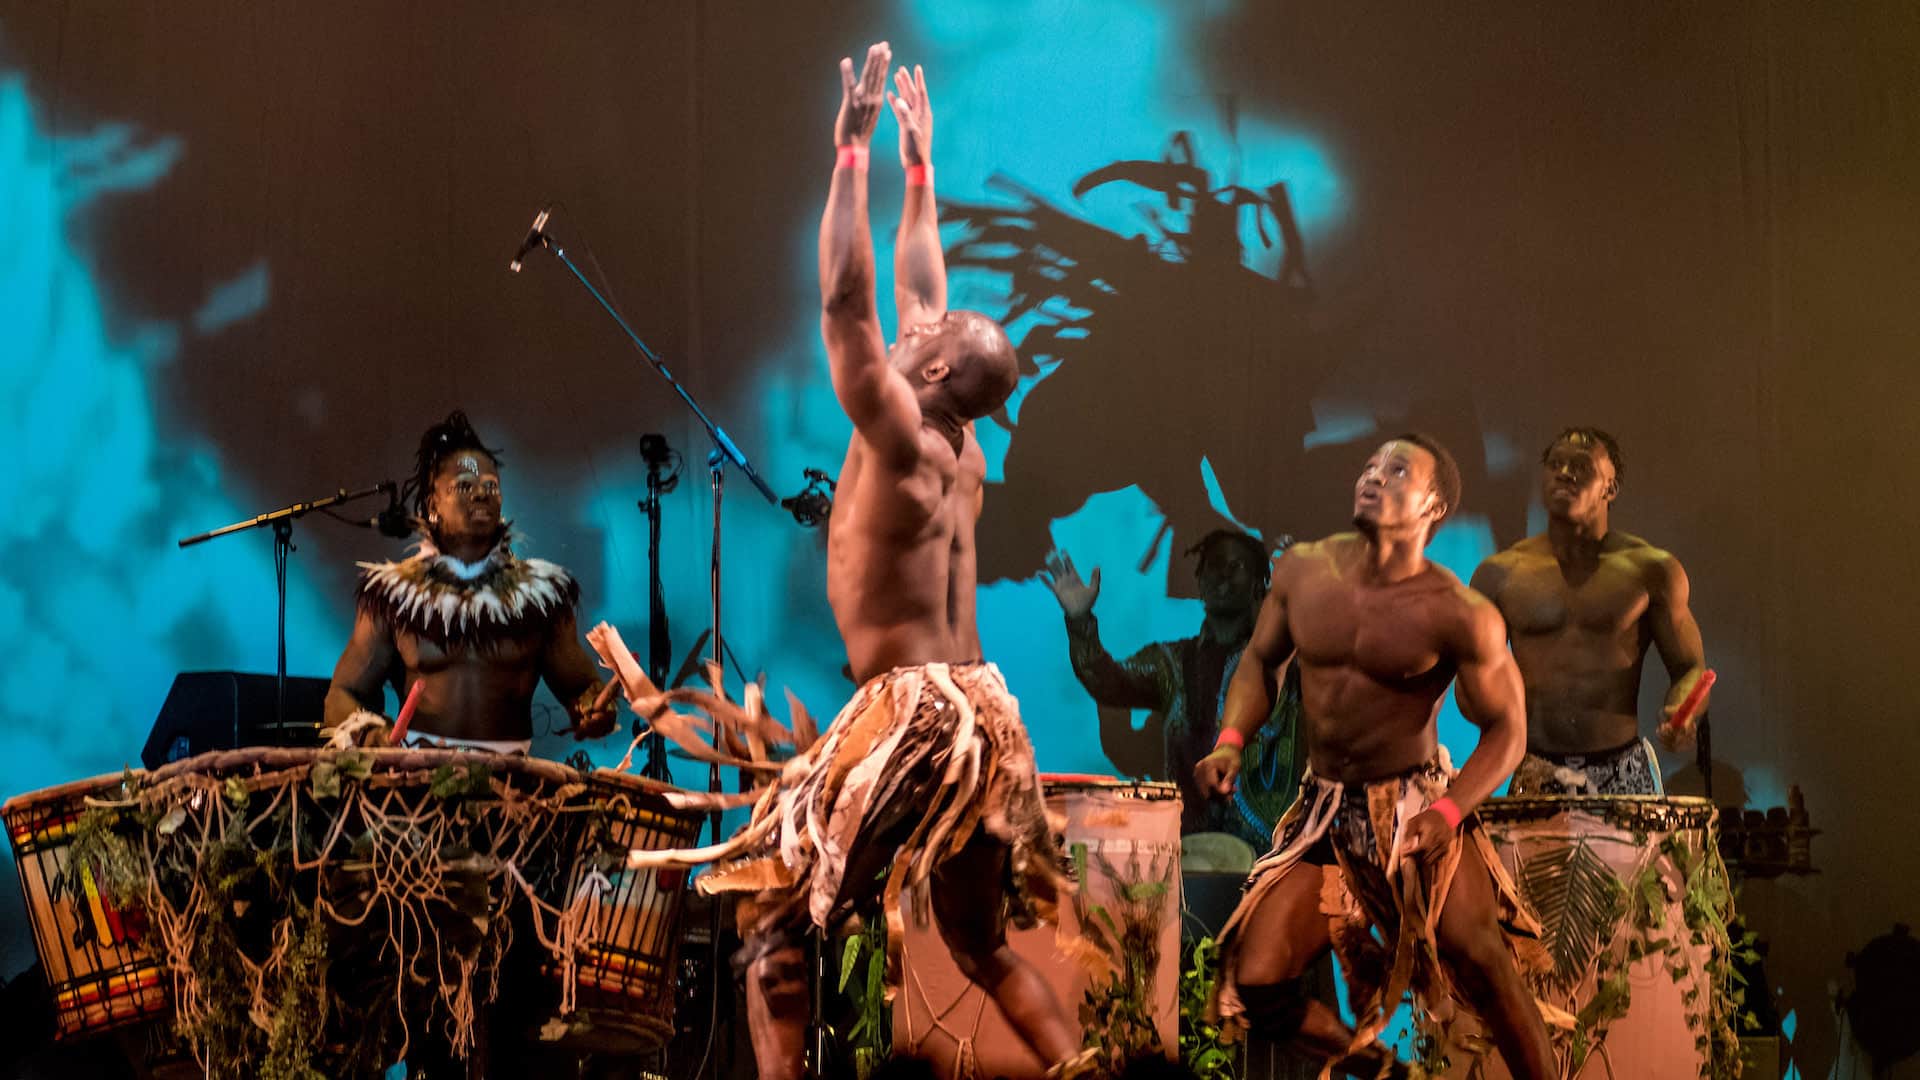 Montréal-based Cirque Kalabanté combines breathtaking acrobatics with live music played on the traditional instruments of their native Guinea.